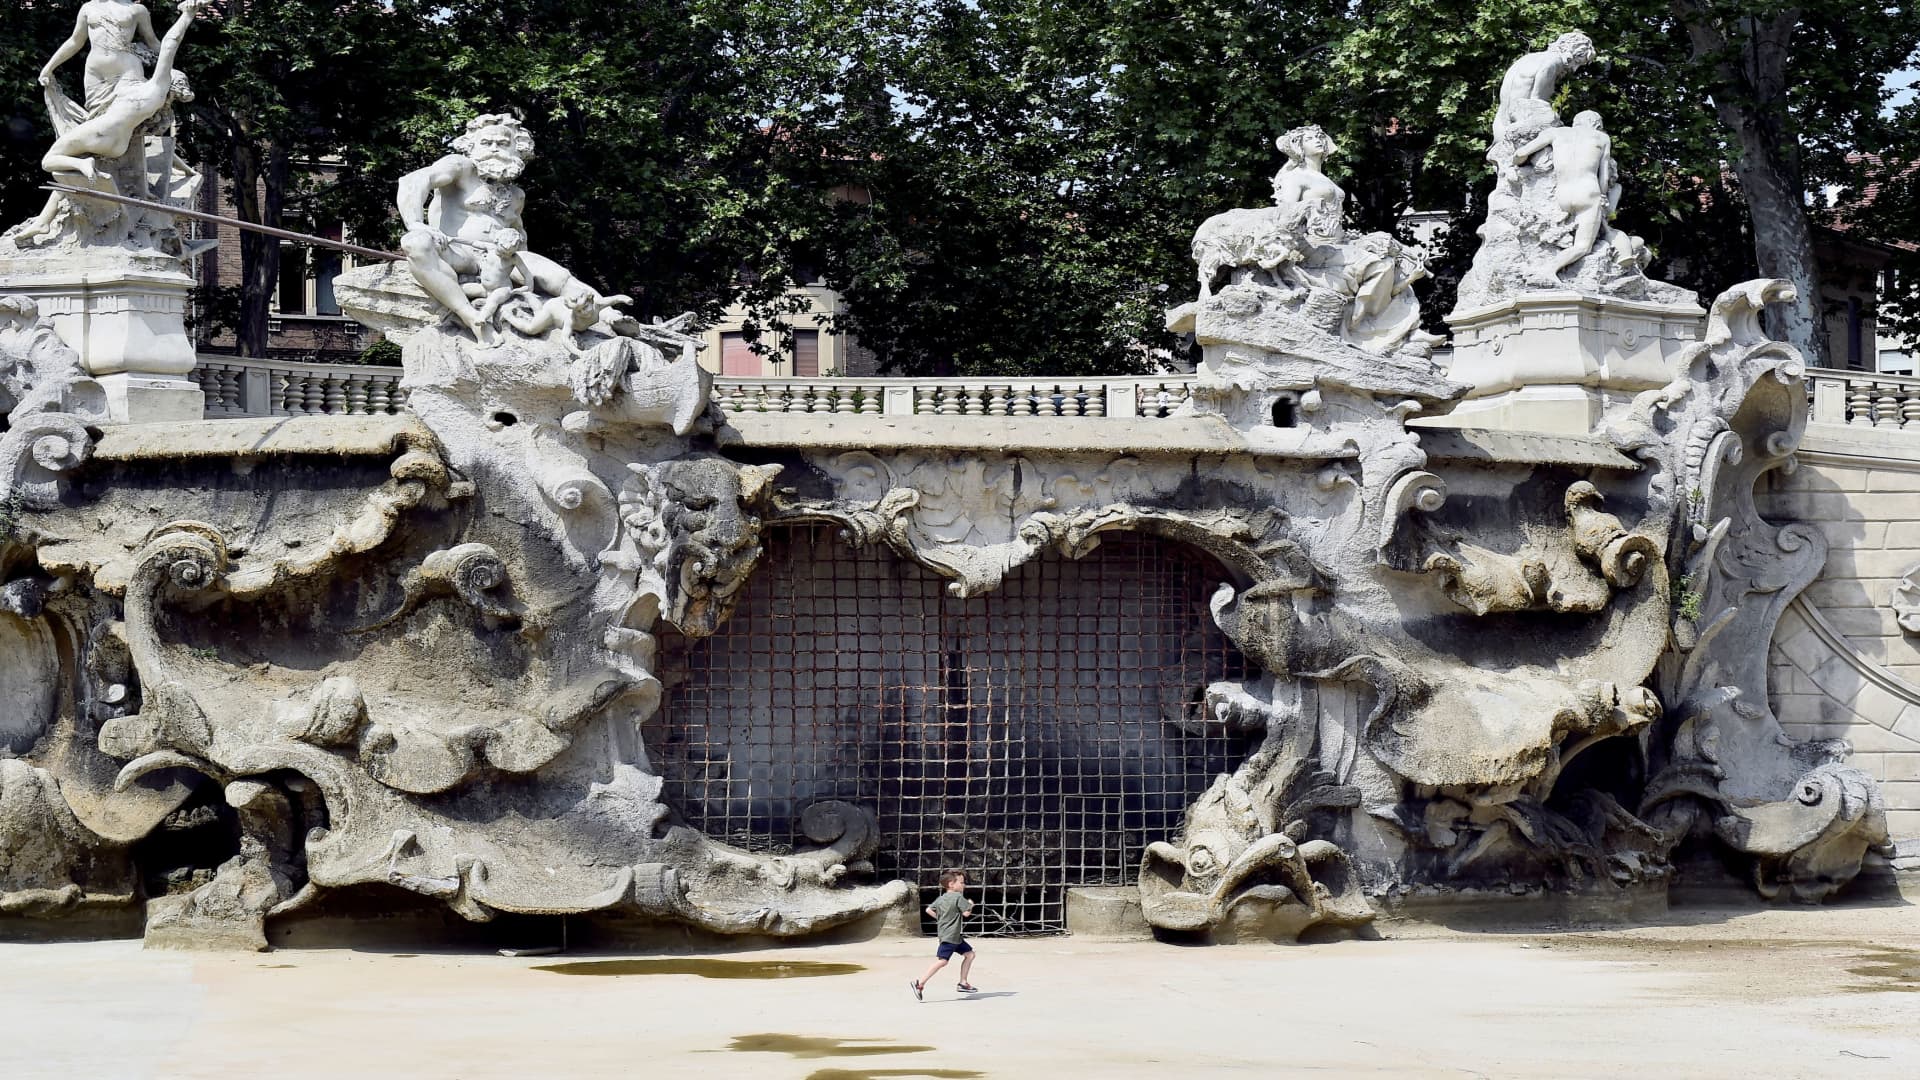 The Fountain of the Months (Fontana dei Mesi) is pictured closed to avoid wasting water, in the Valentino Park, Turin, Italy June 19, 2022. 